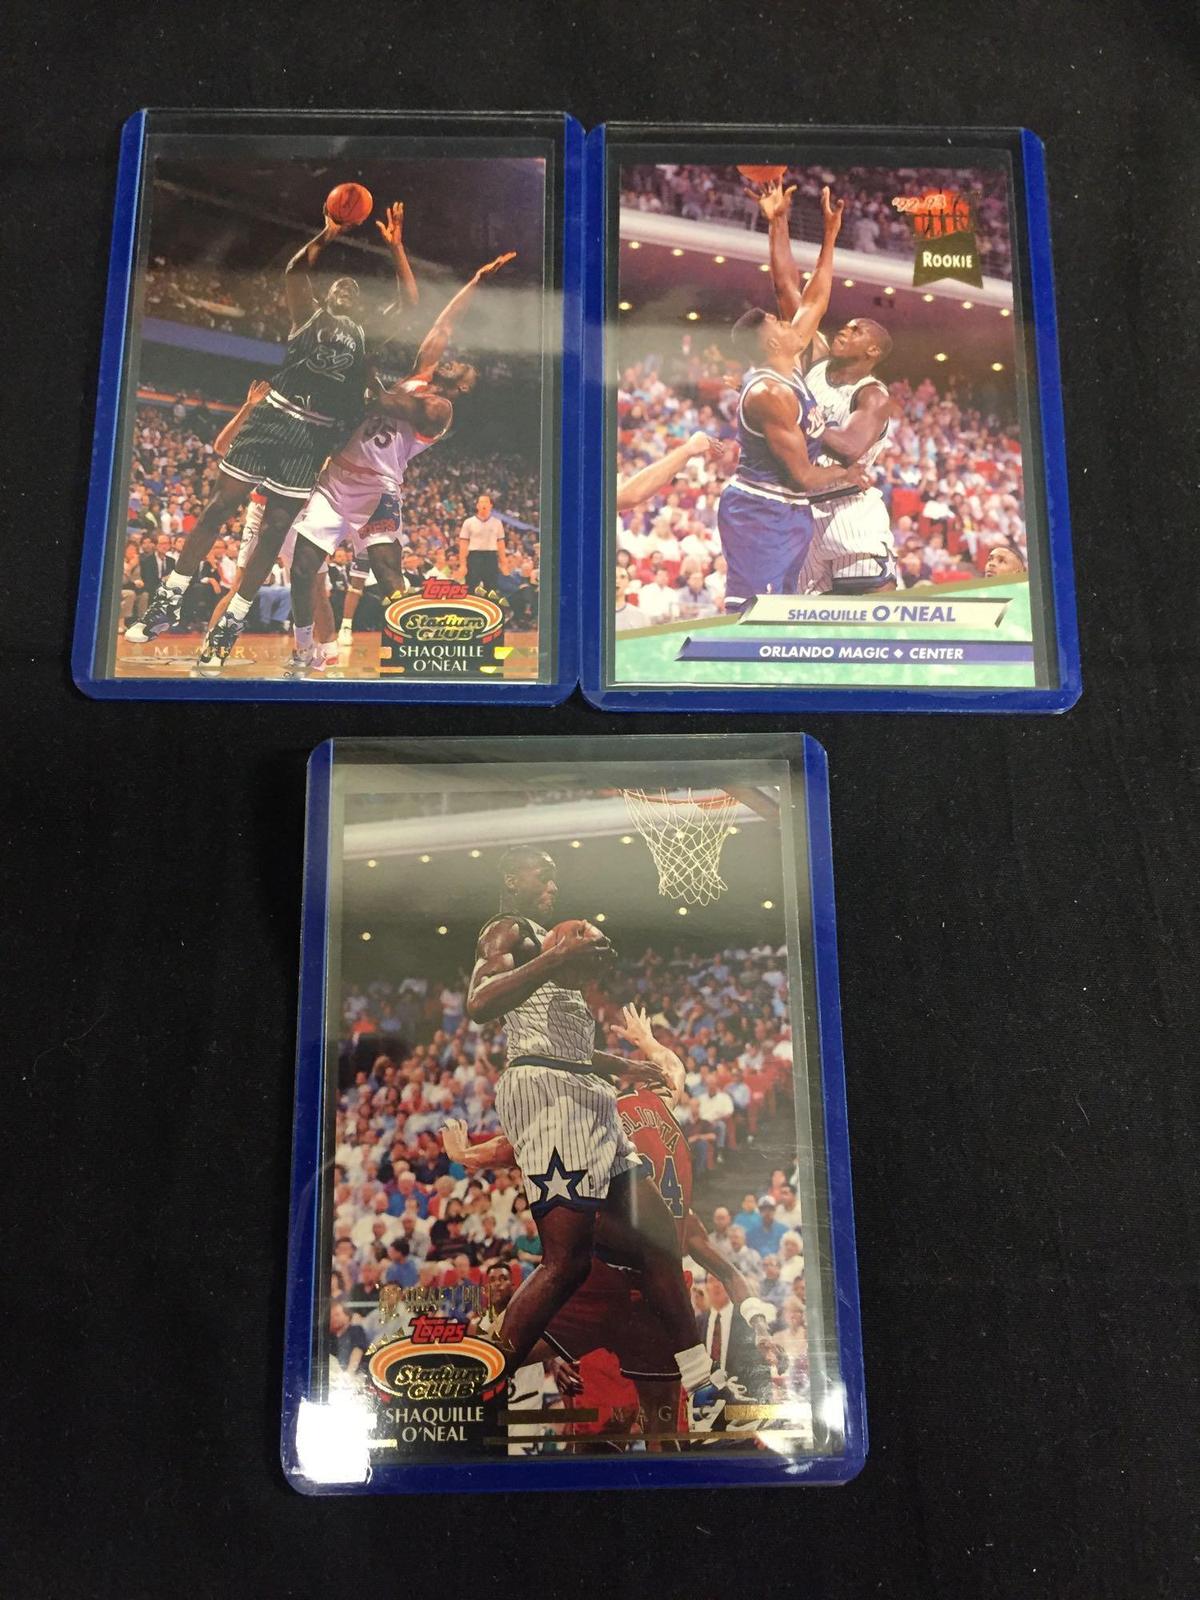 3 Card Lot of Shaquille O'Neal Magic Rookie Basketball Cards from 1992-93